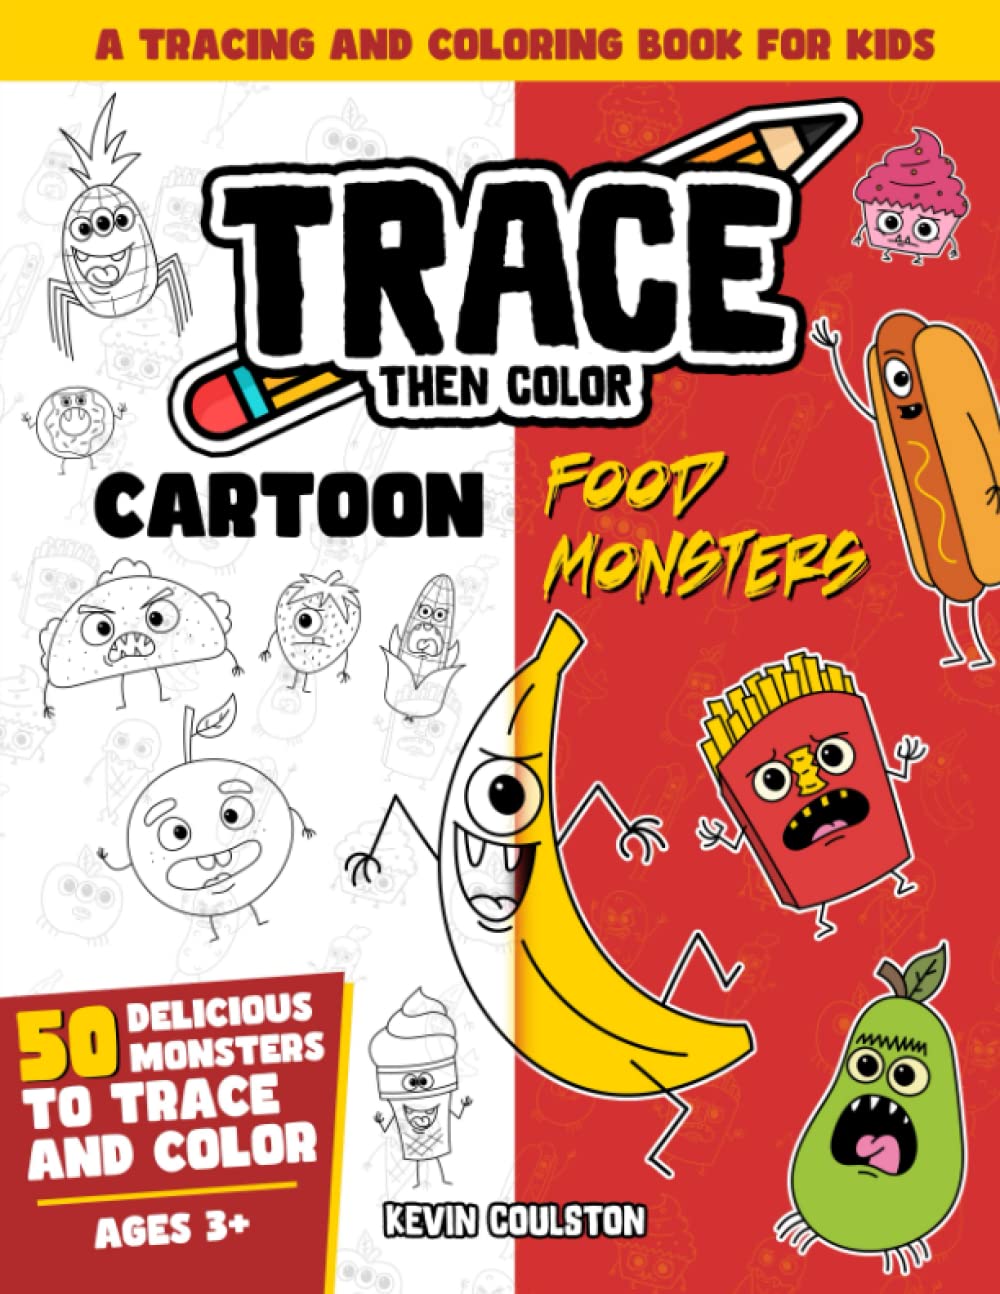 Trace Then Color: Cartoon Food Monsters